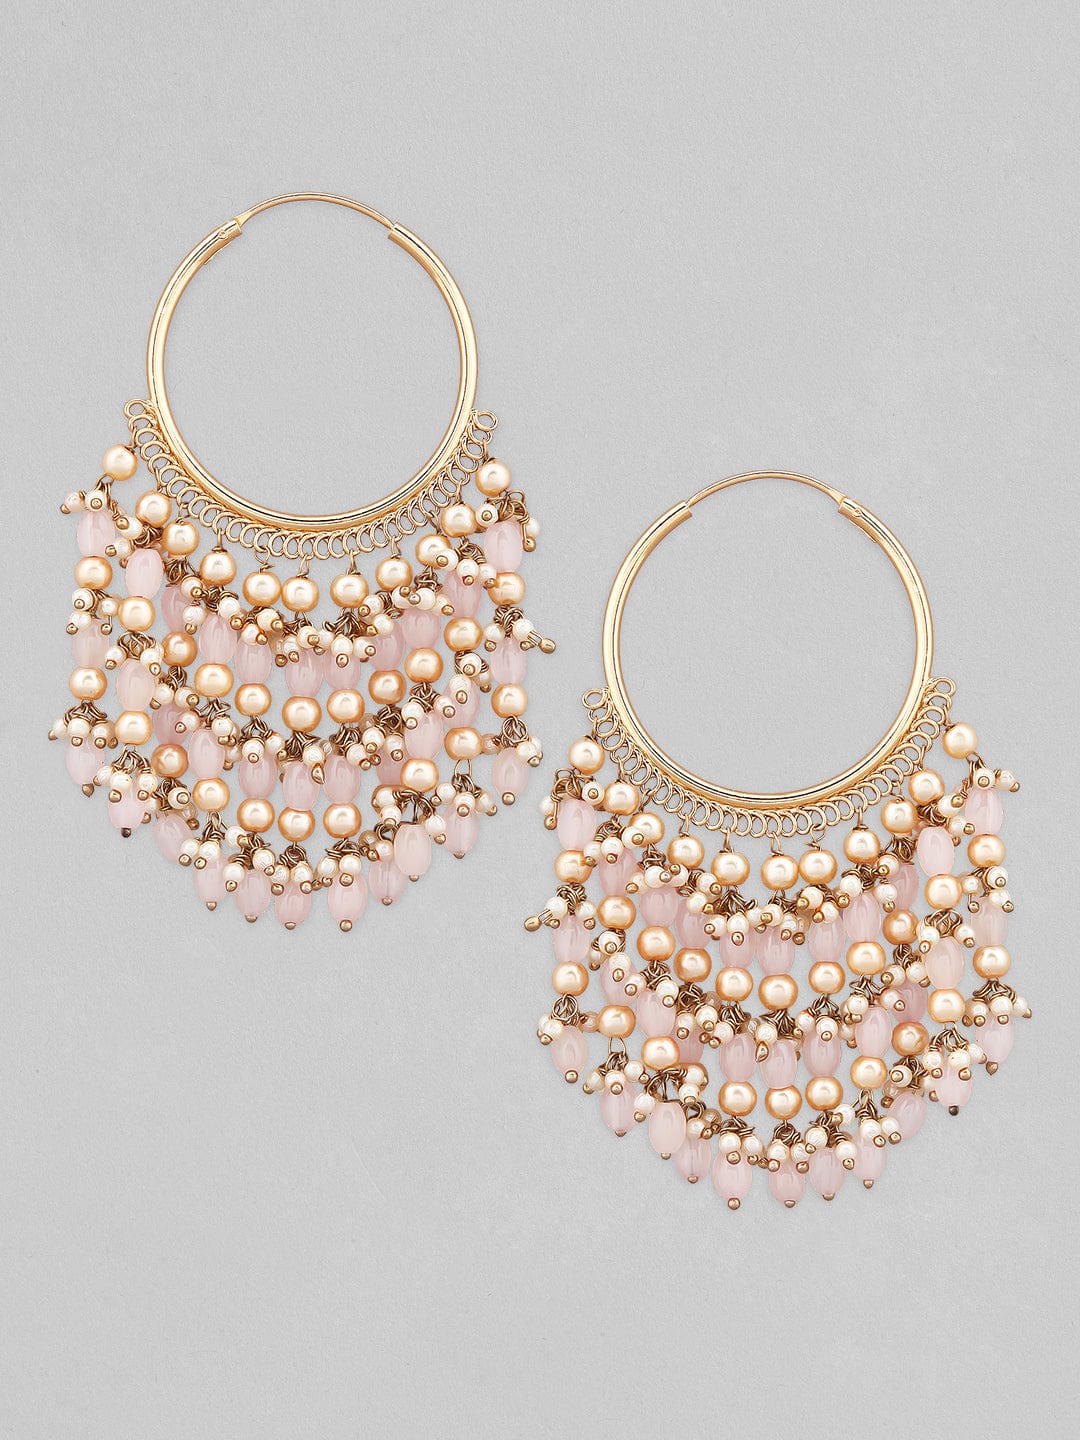 Rubans Gold Plated Chandbali Earrings With Pastel Colour Beads. Earrings